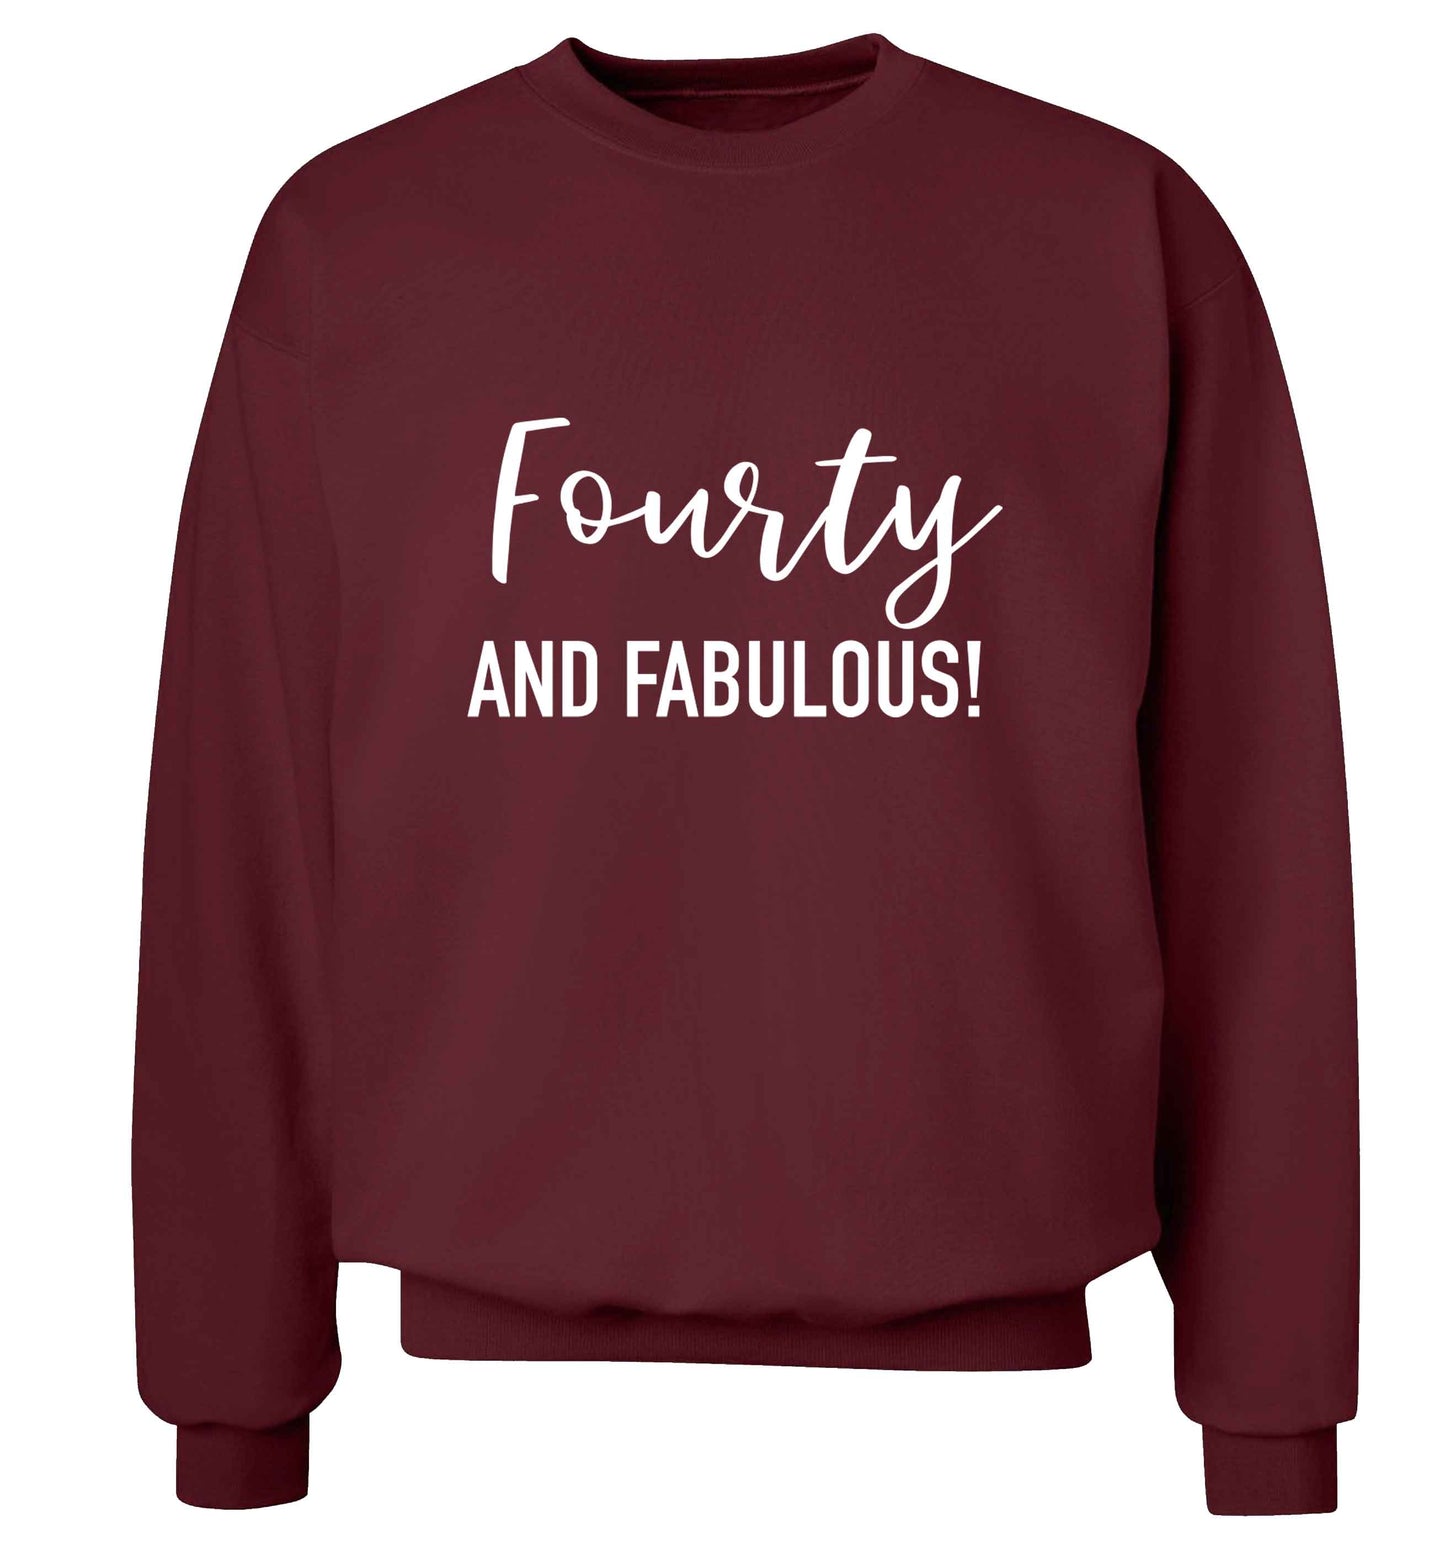 Fourty and fabulous adult's unisex maroon sweater 2XL